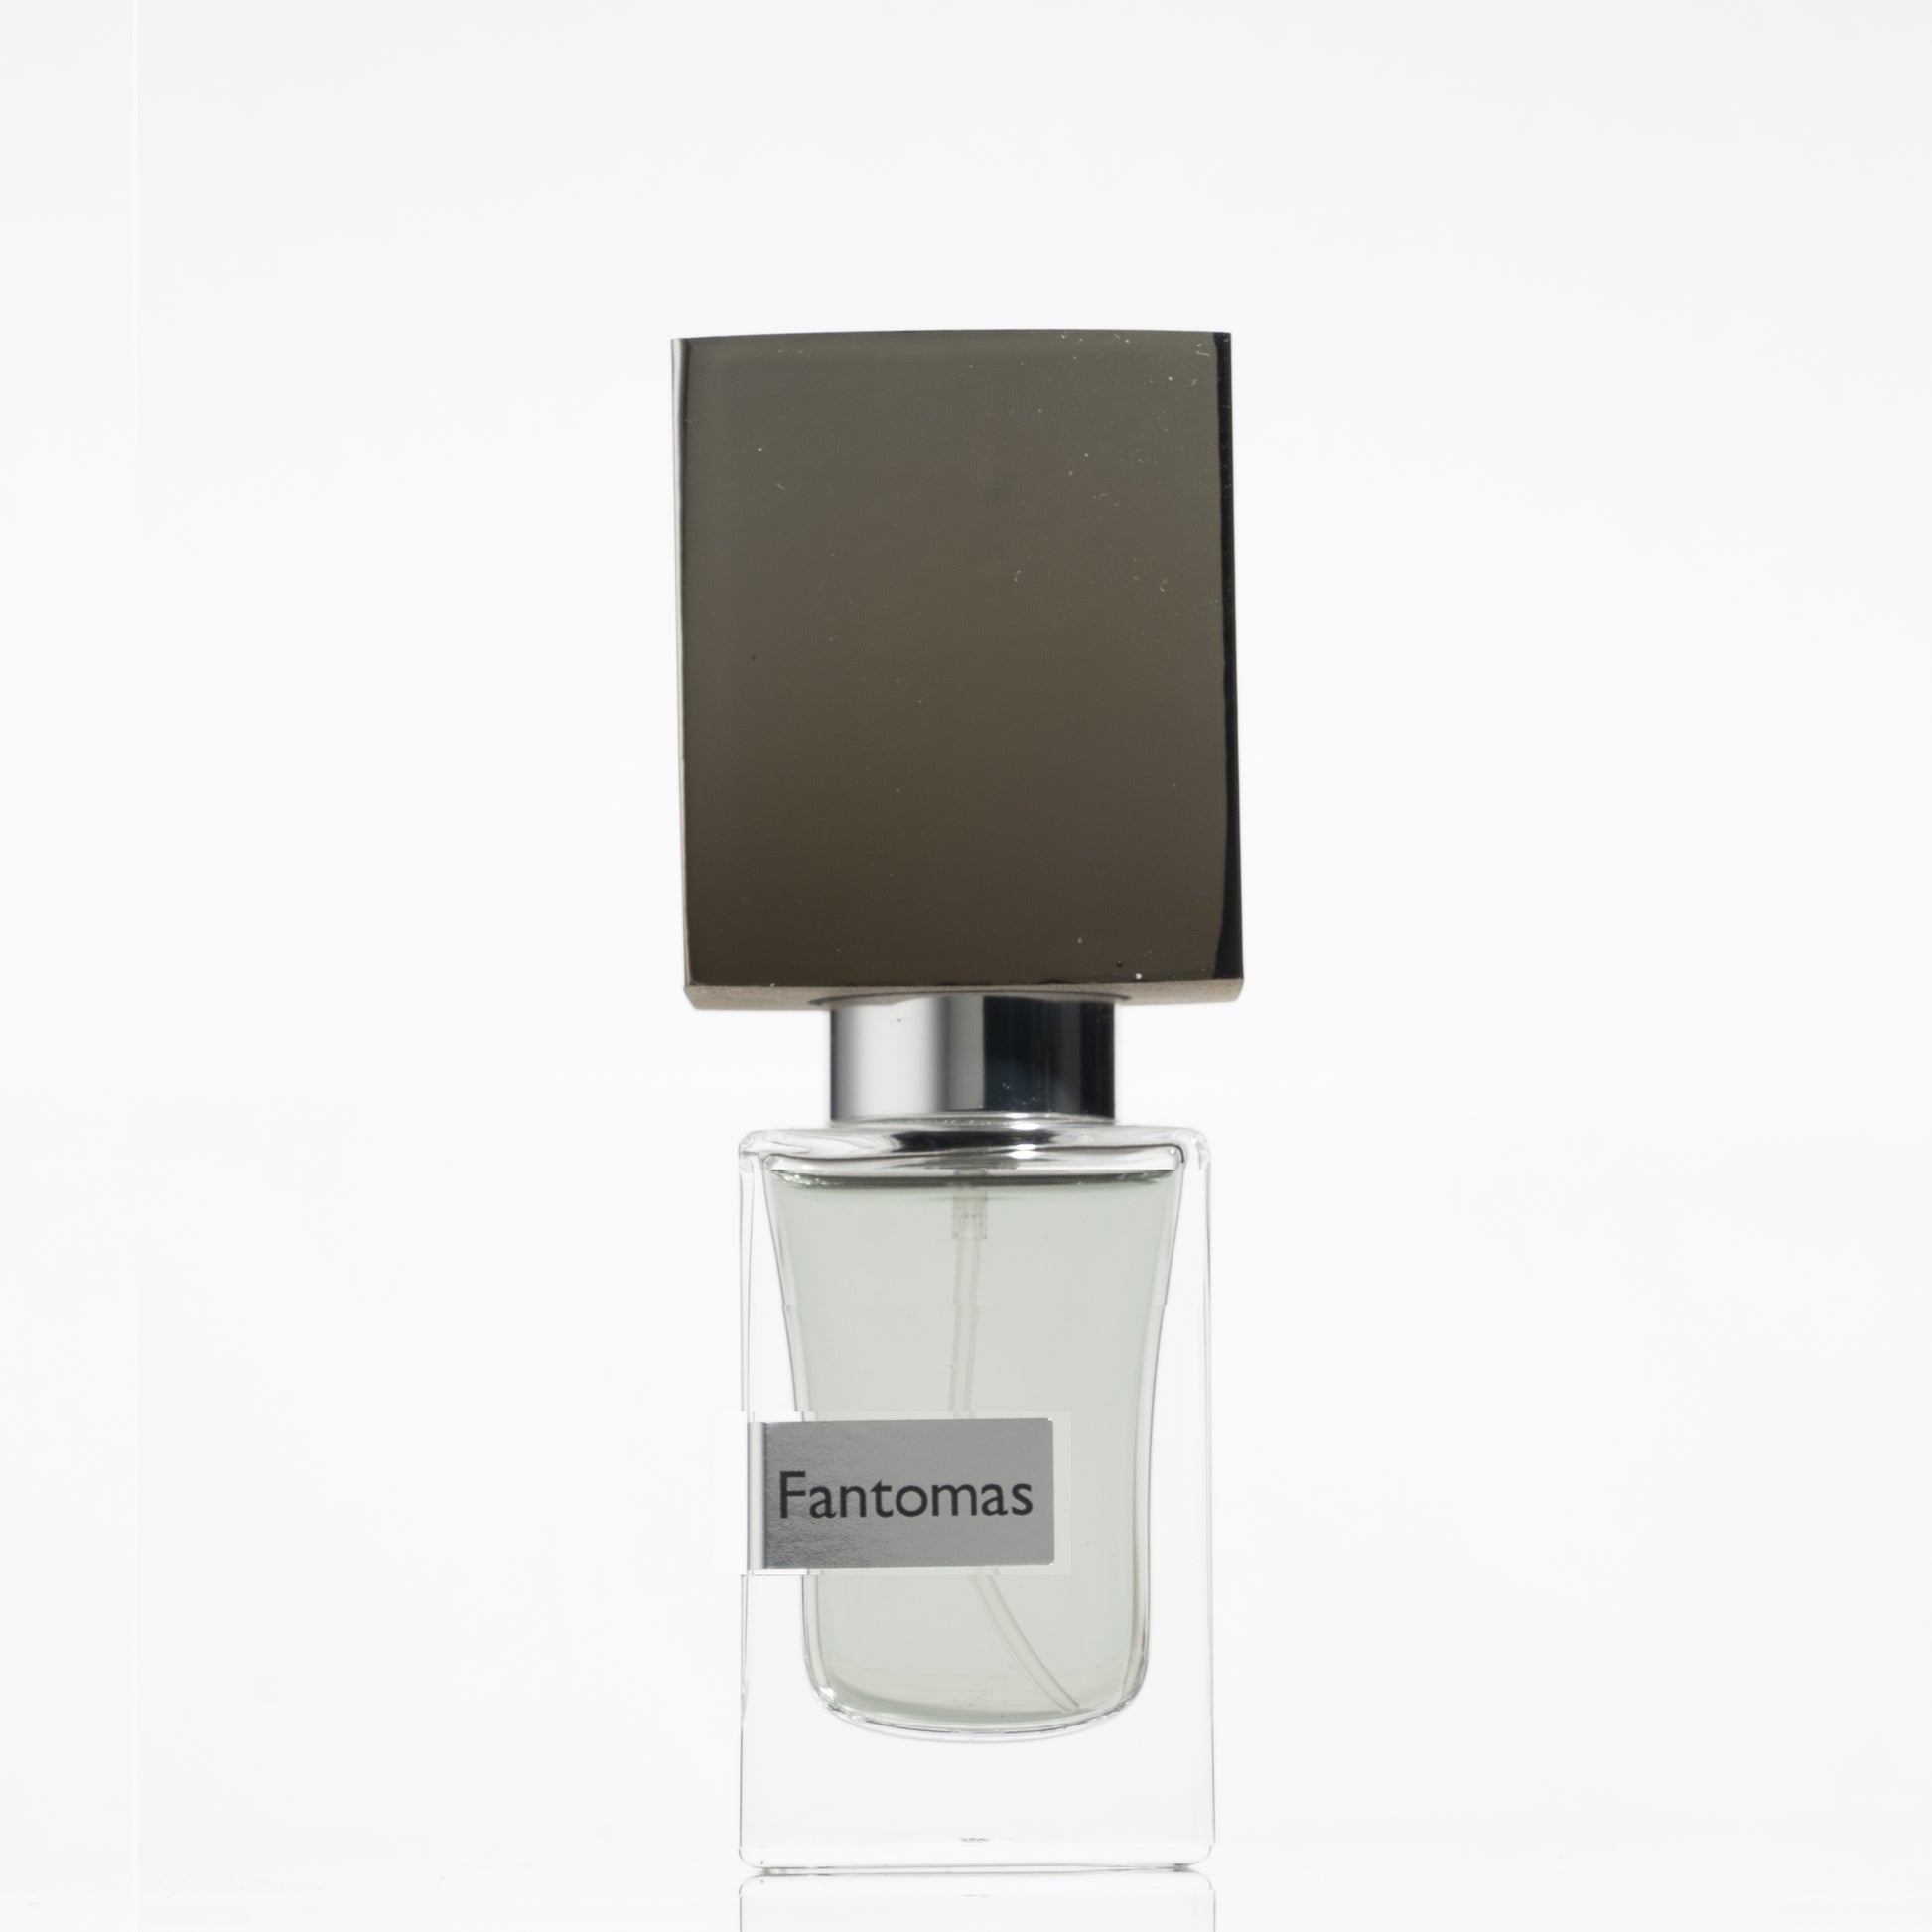 Fantomas by Nasomatto Scents Angel ScentsAngel Luxury Fragrance, Cologne and Perfume Sample  | Scents Angel.